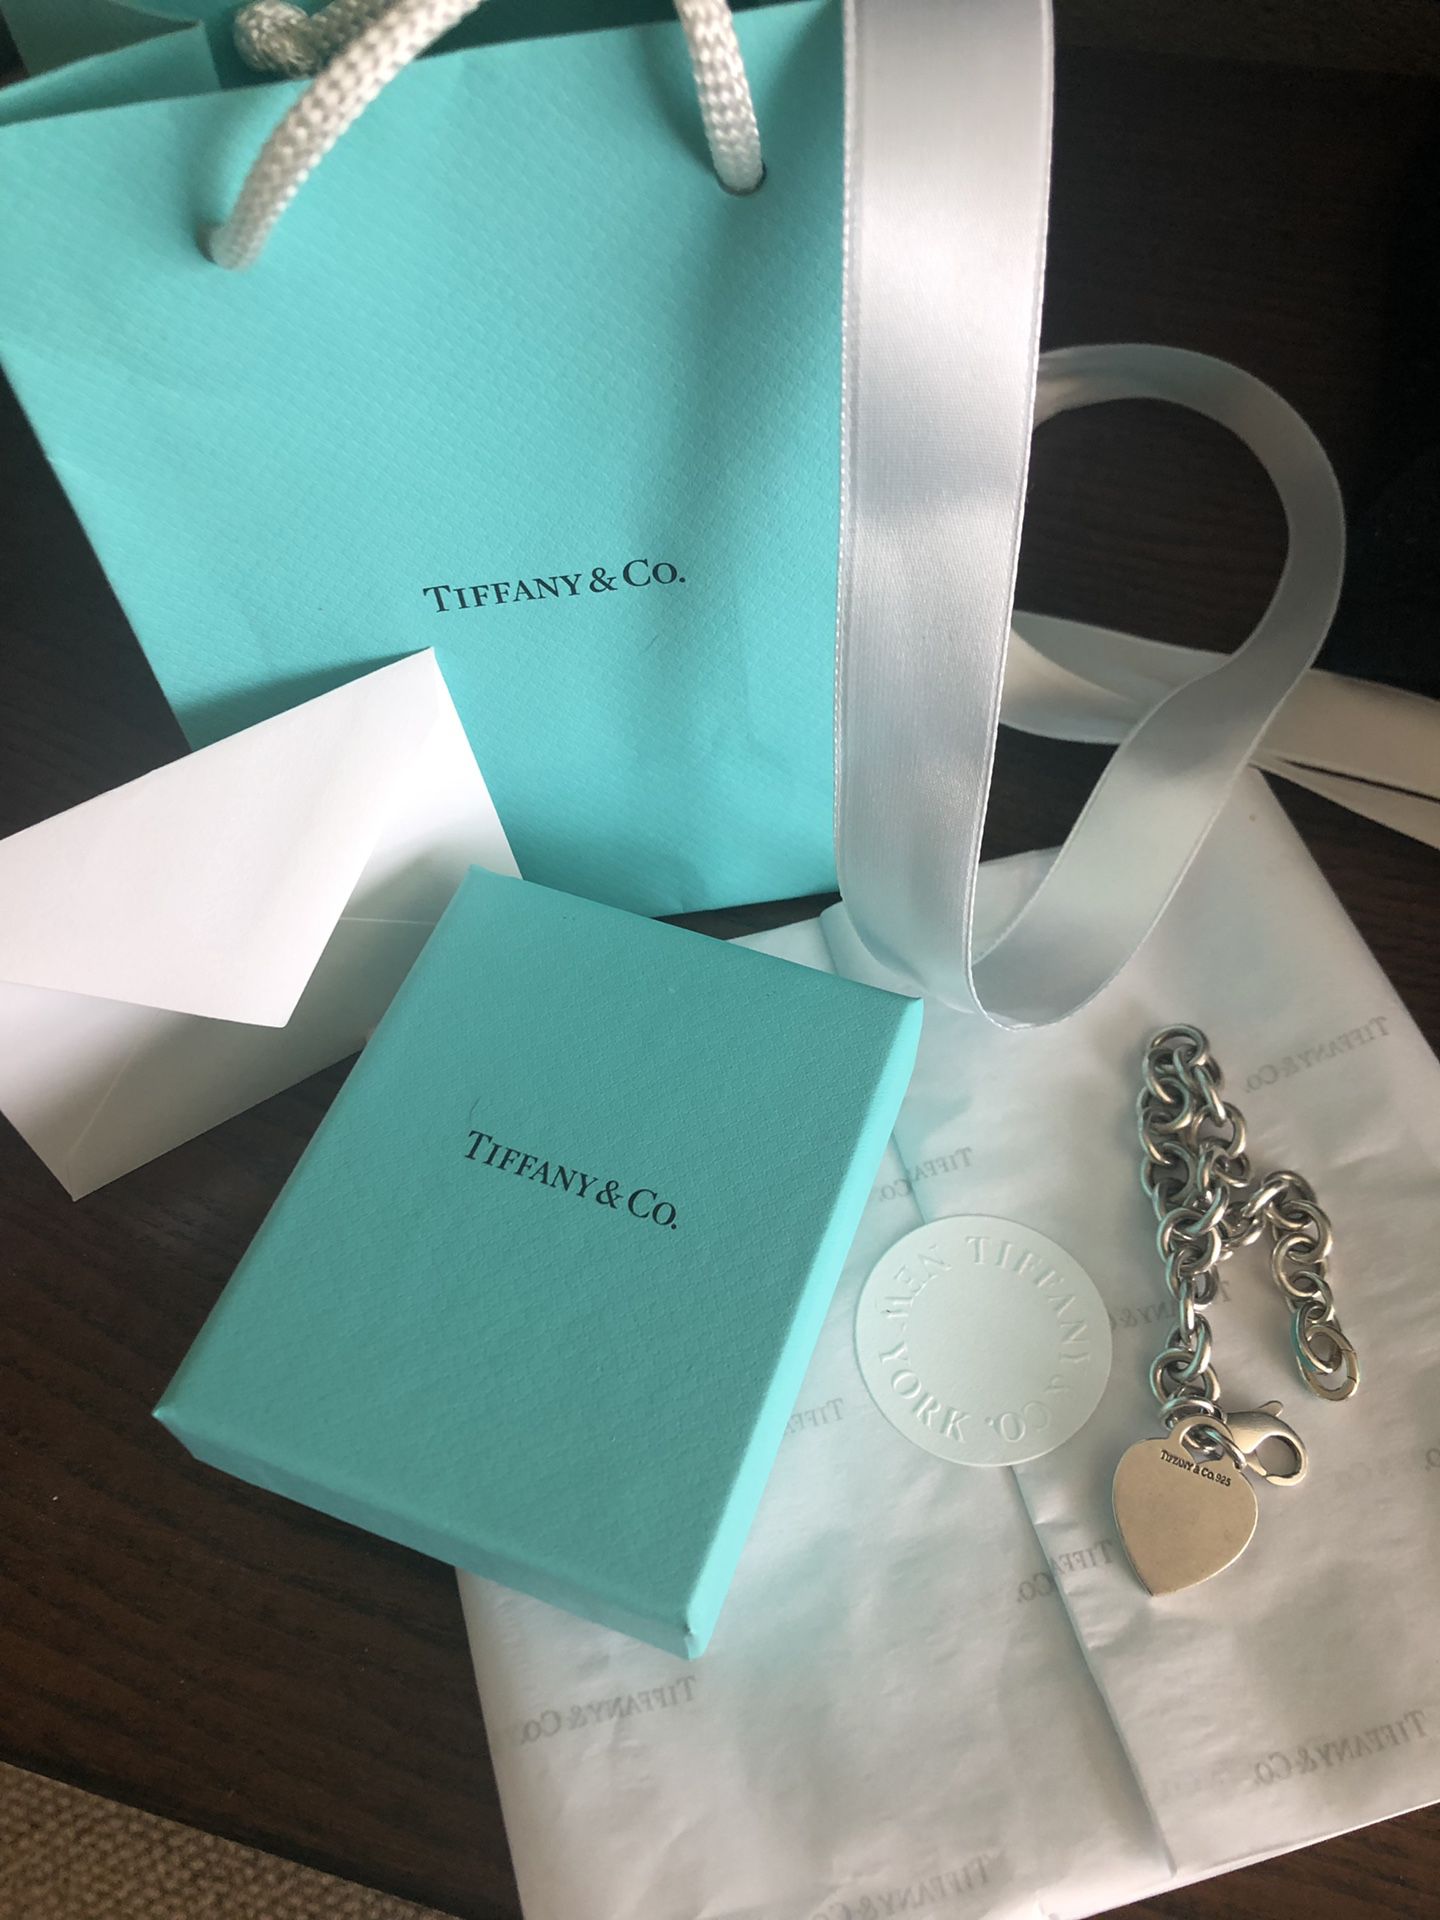 Authentic Tiffany bracelet and other Tiffany necklaces